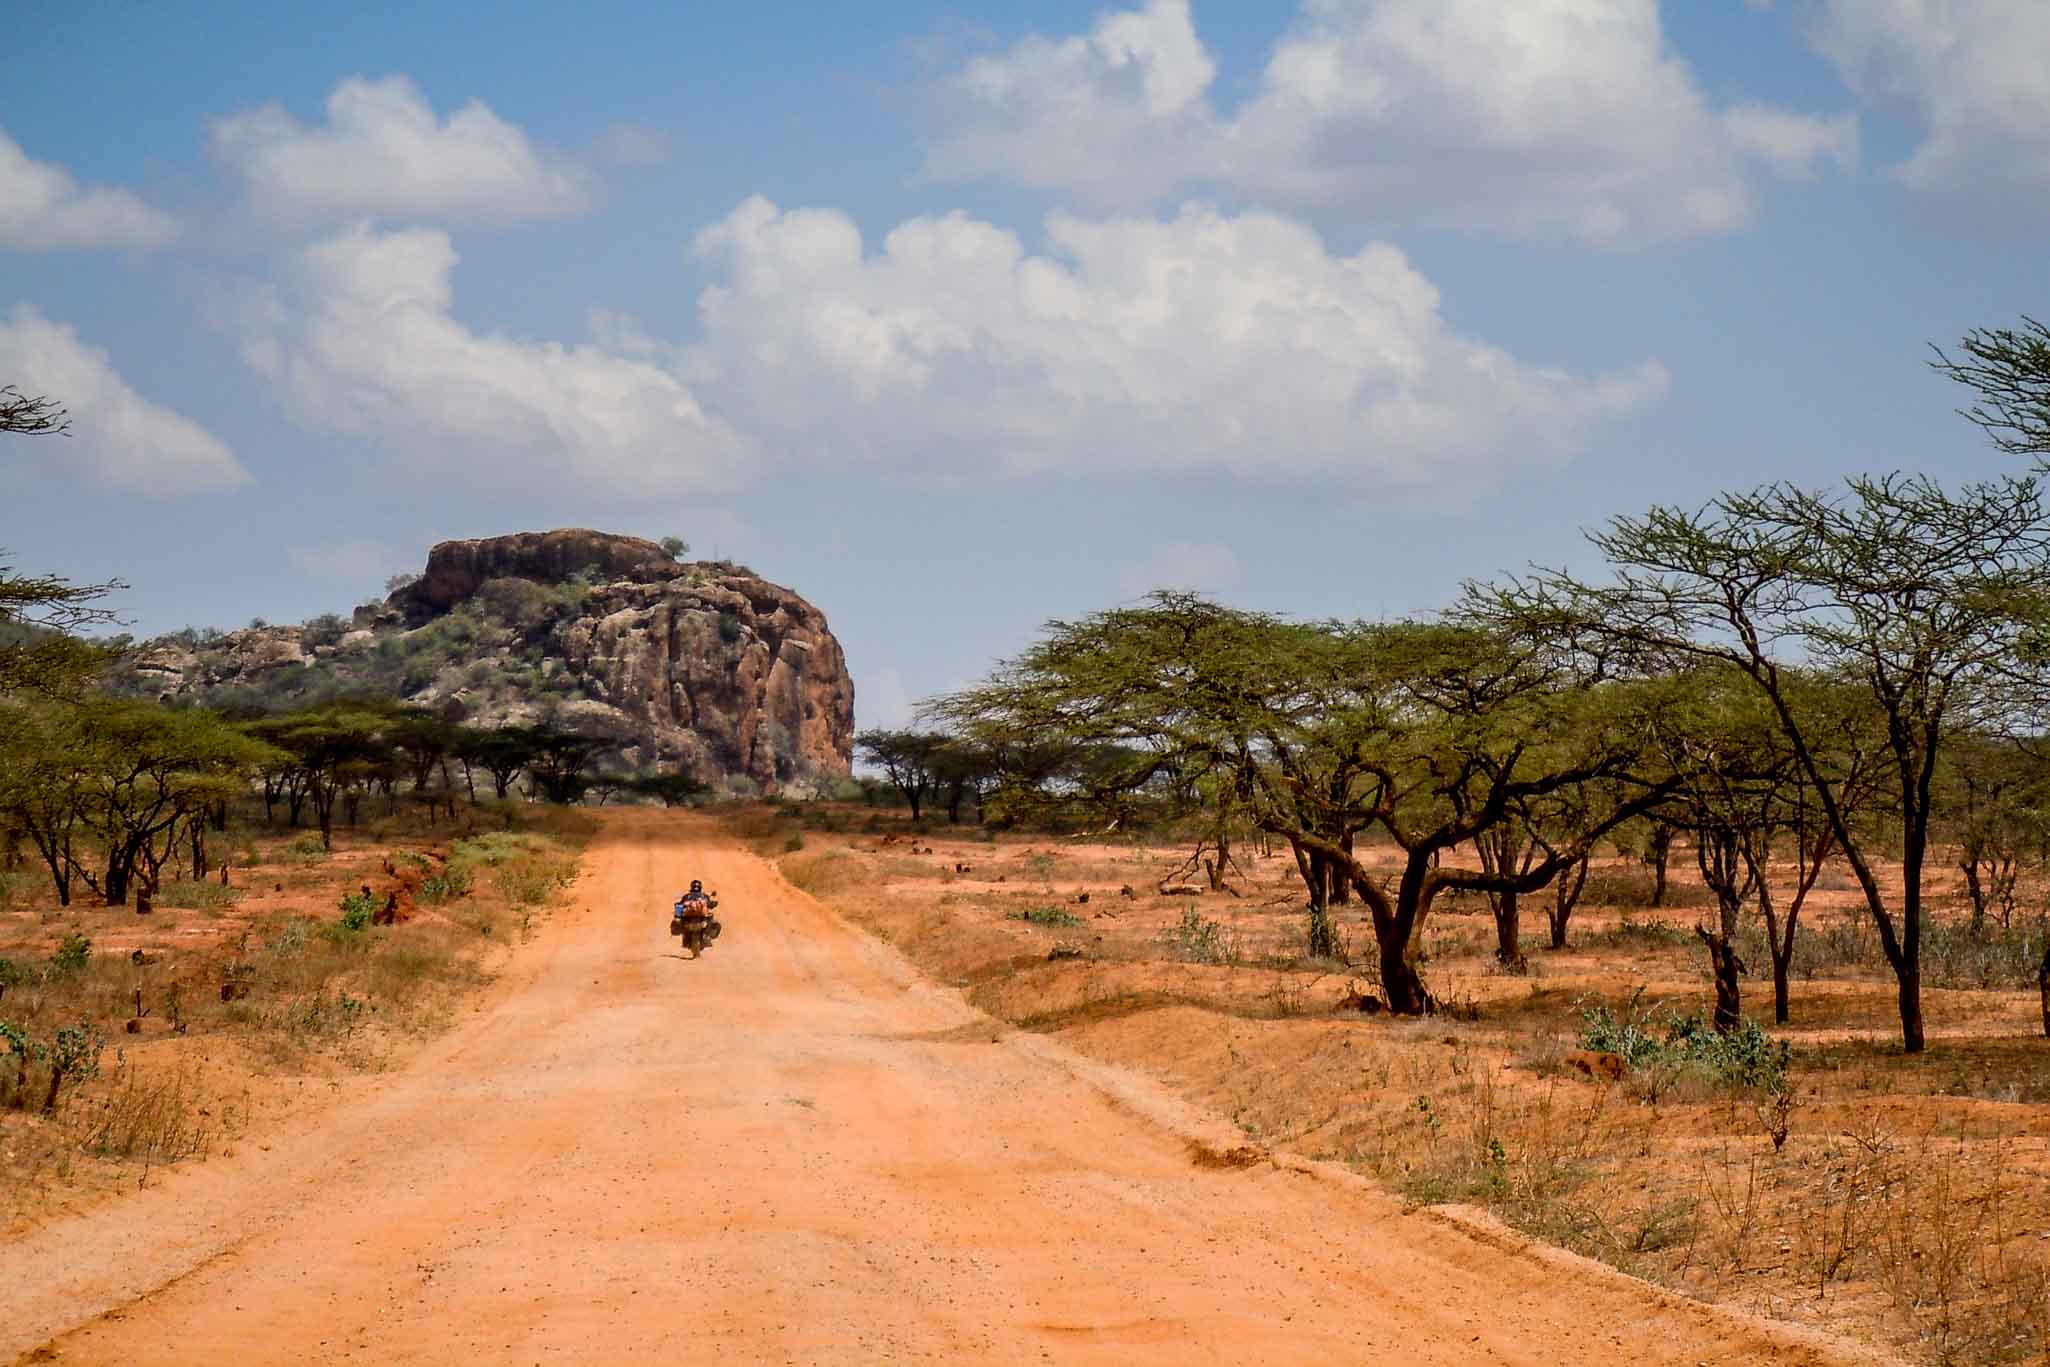 Mountainous area in Kenya where it is incredibly warm and dry